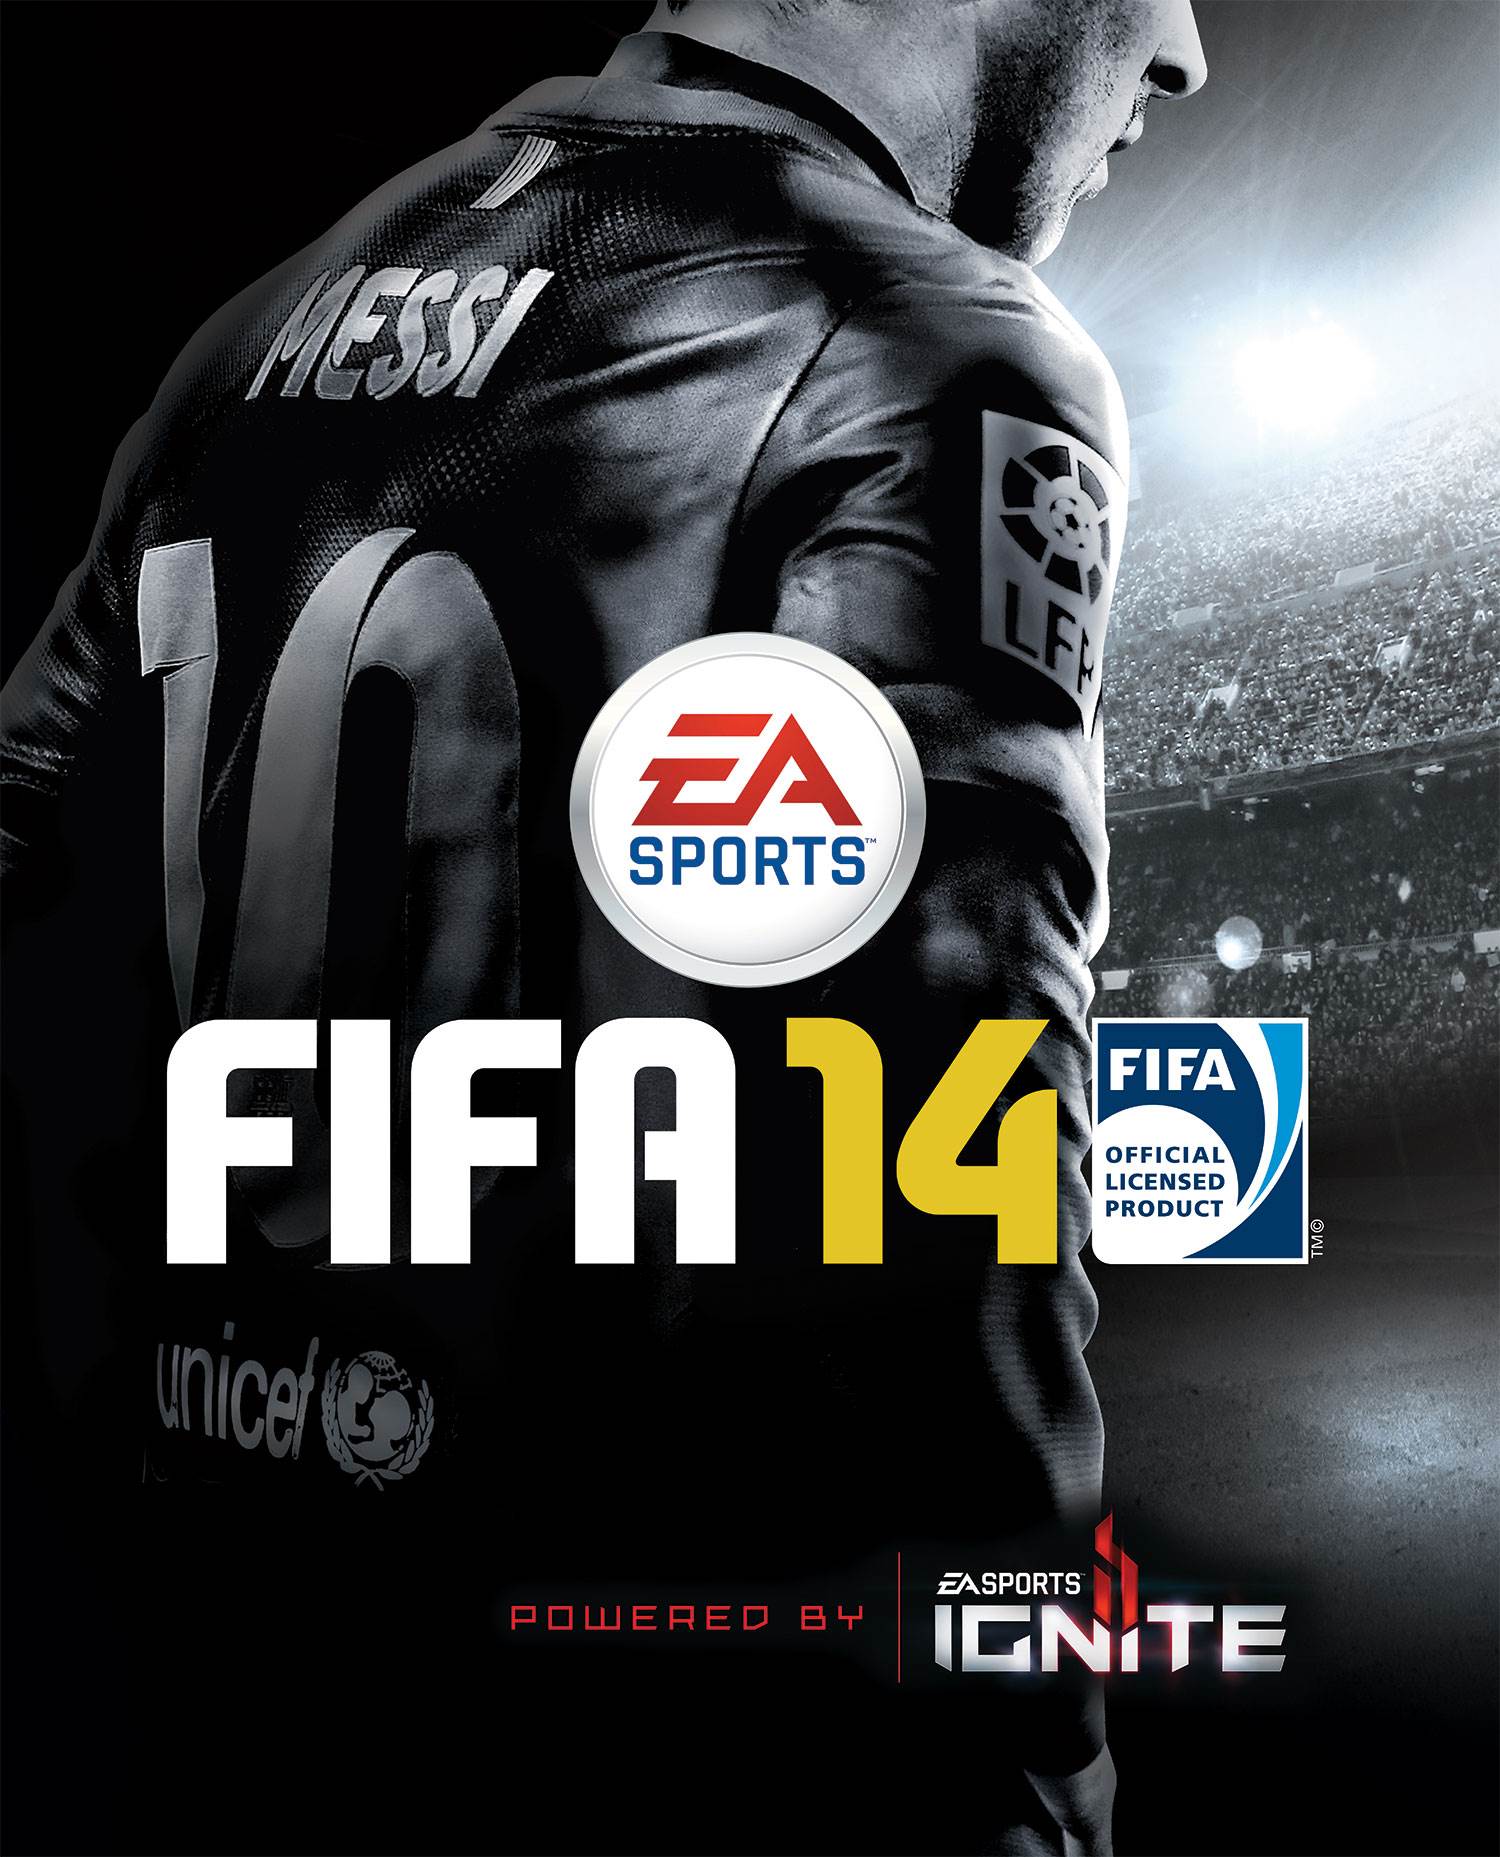 where can i buy fifa 14 coins